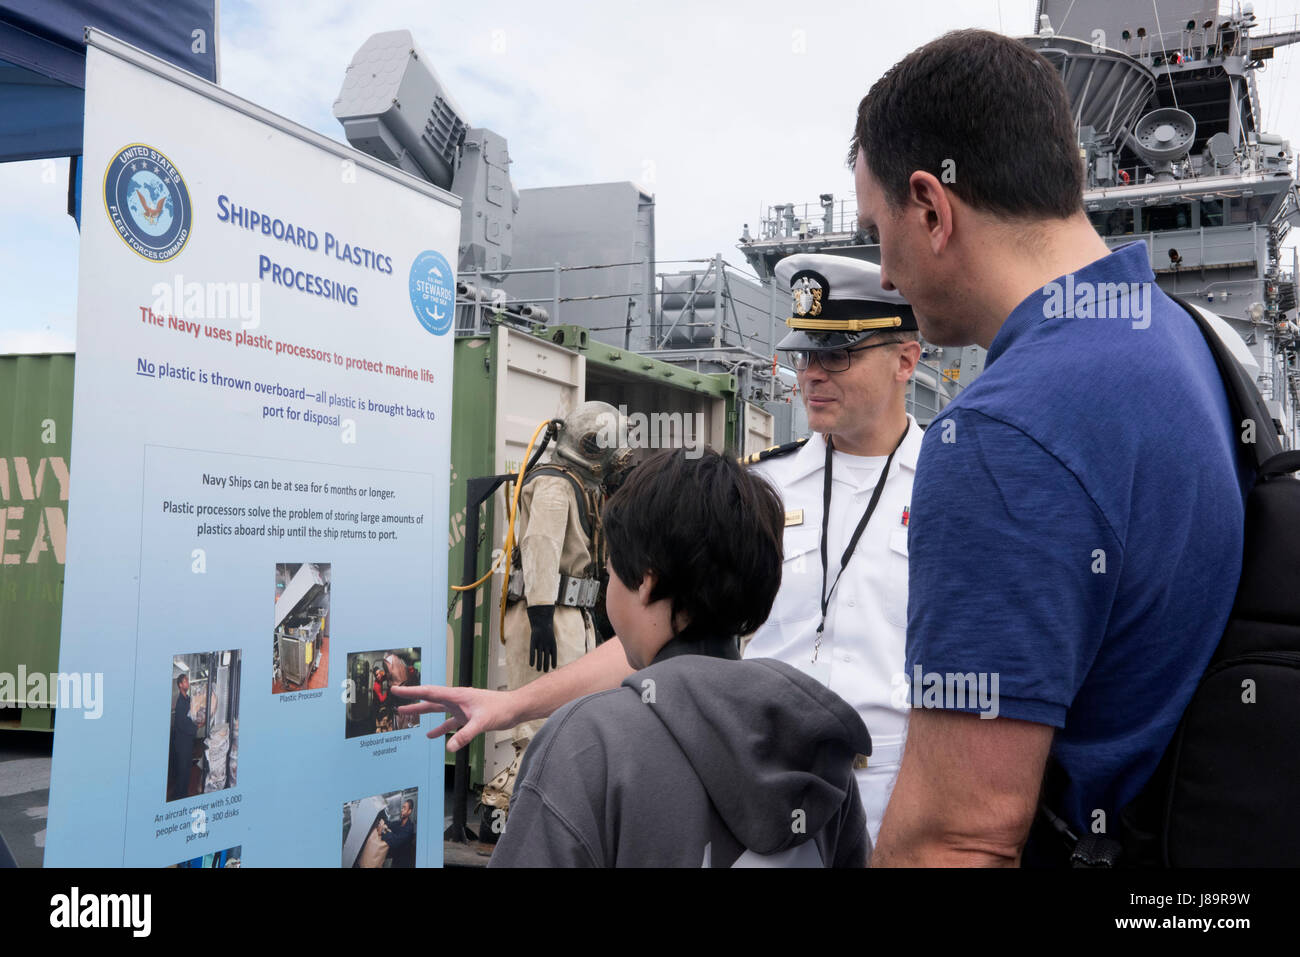 170526-N-MS174-001 NEW YORK (May 26, 2017) Lt. Cmdr. James McLeod, a public affairs officer assigned to U.S. Fleet Forces Command, discusses shipboard plastic processing with visitors at the U.S. Navy’s “Stewards of the Sea: Defending Freedom, Protecting the Environment” exhibit aboard the amphibious assault ship USS Kearsarge (LHD 3) during Fleet Week New York. The Navy employs every means available to mitigate the potential environmental effects of our activities without jeopardizing the safety of our Sailors or impacting our Navy readiness mission. (U.S. Navy photo by Bobbie A. Camp/Release Stock Photo